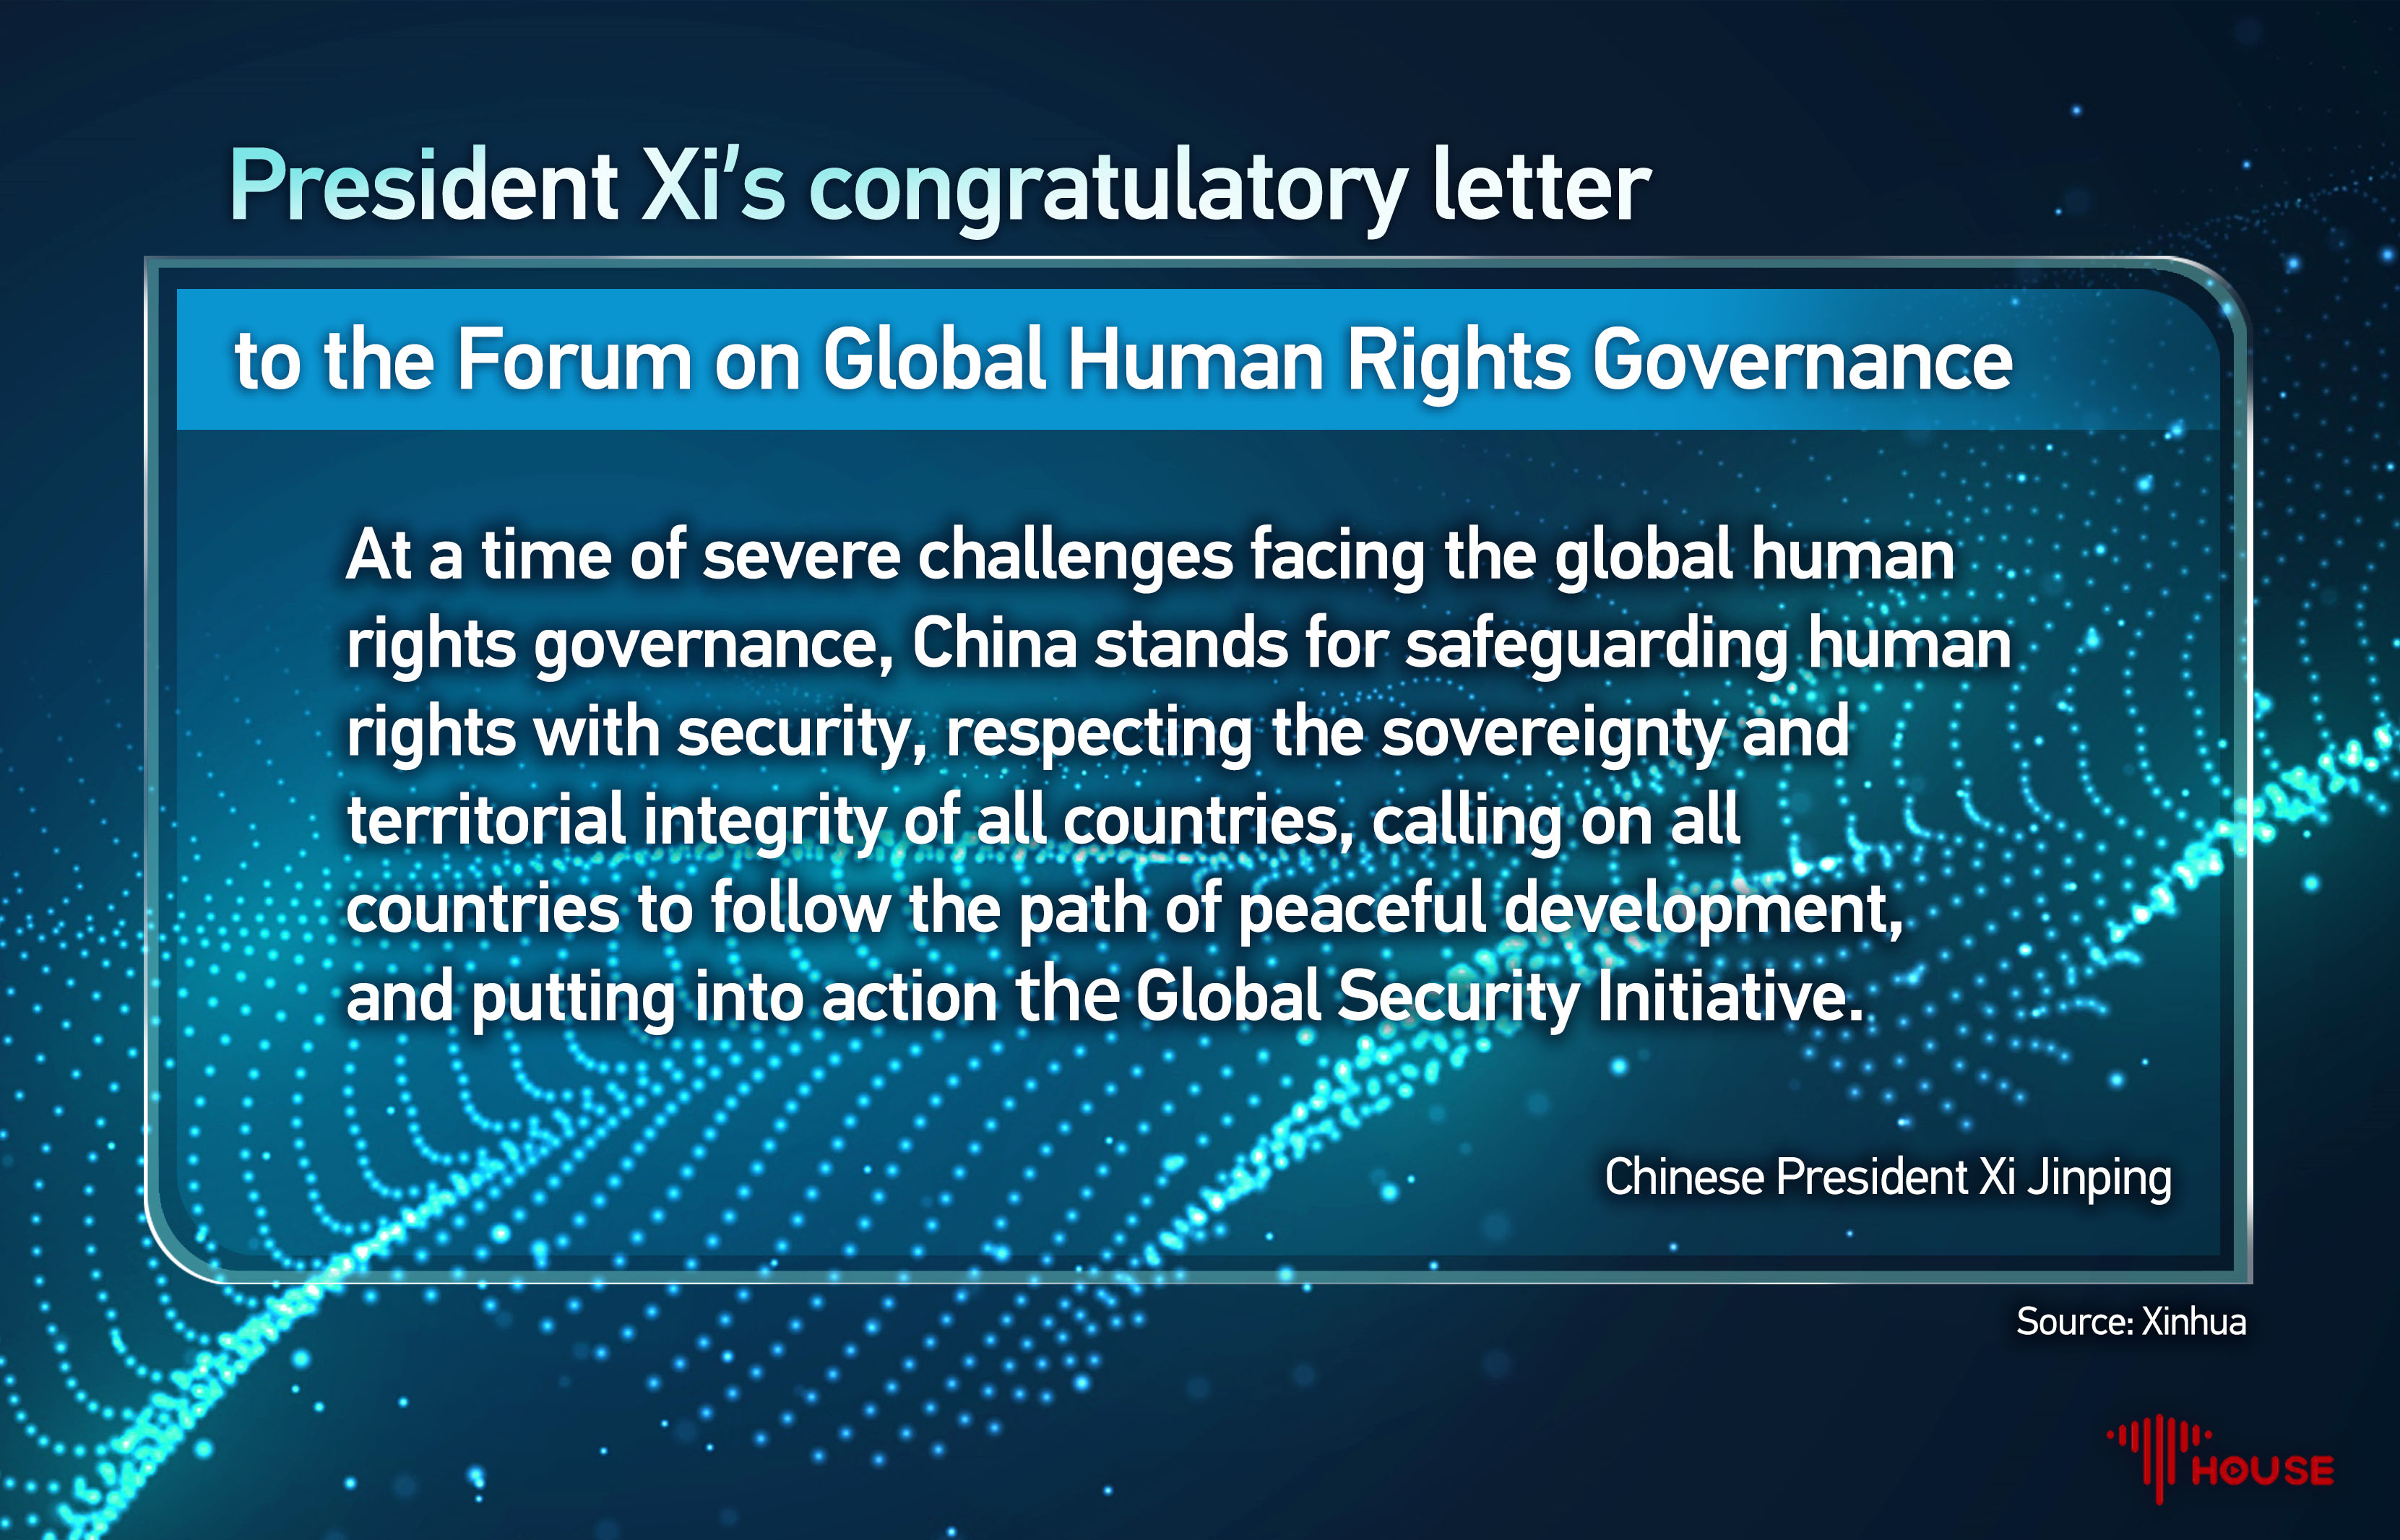 President Xi's congratulatory letter to the Forum on Global Human Rights Governance